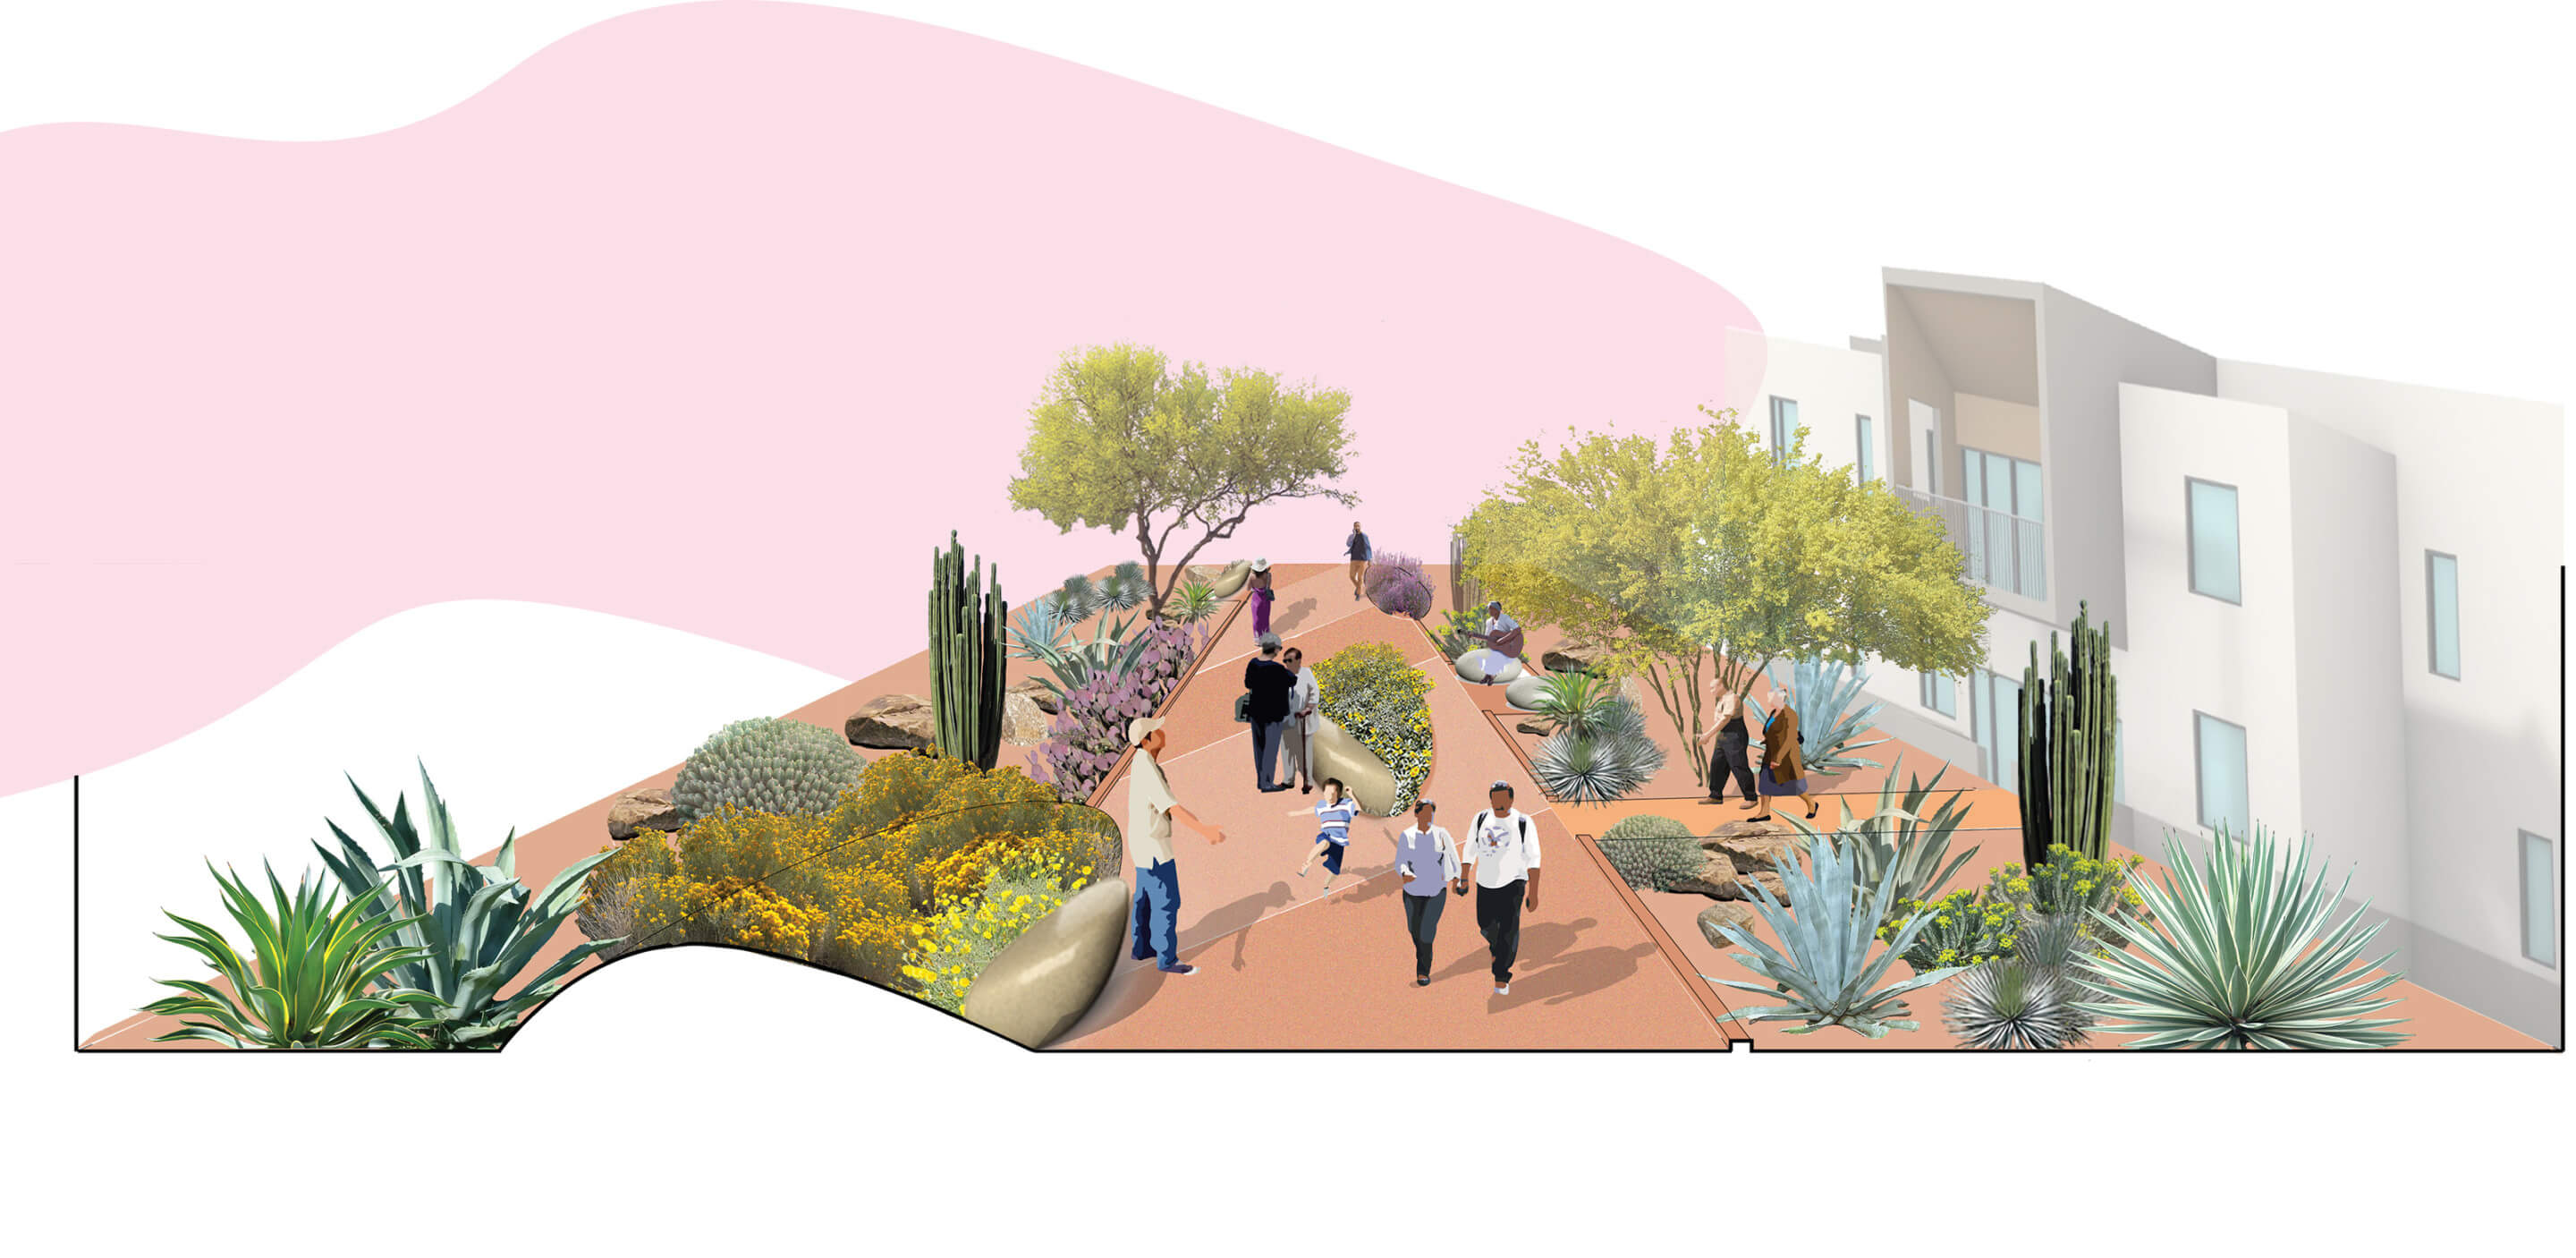 rendering of an affordable housing complex in california surrounded by native plants